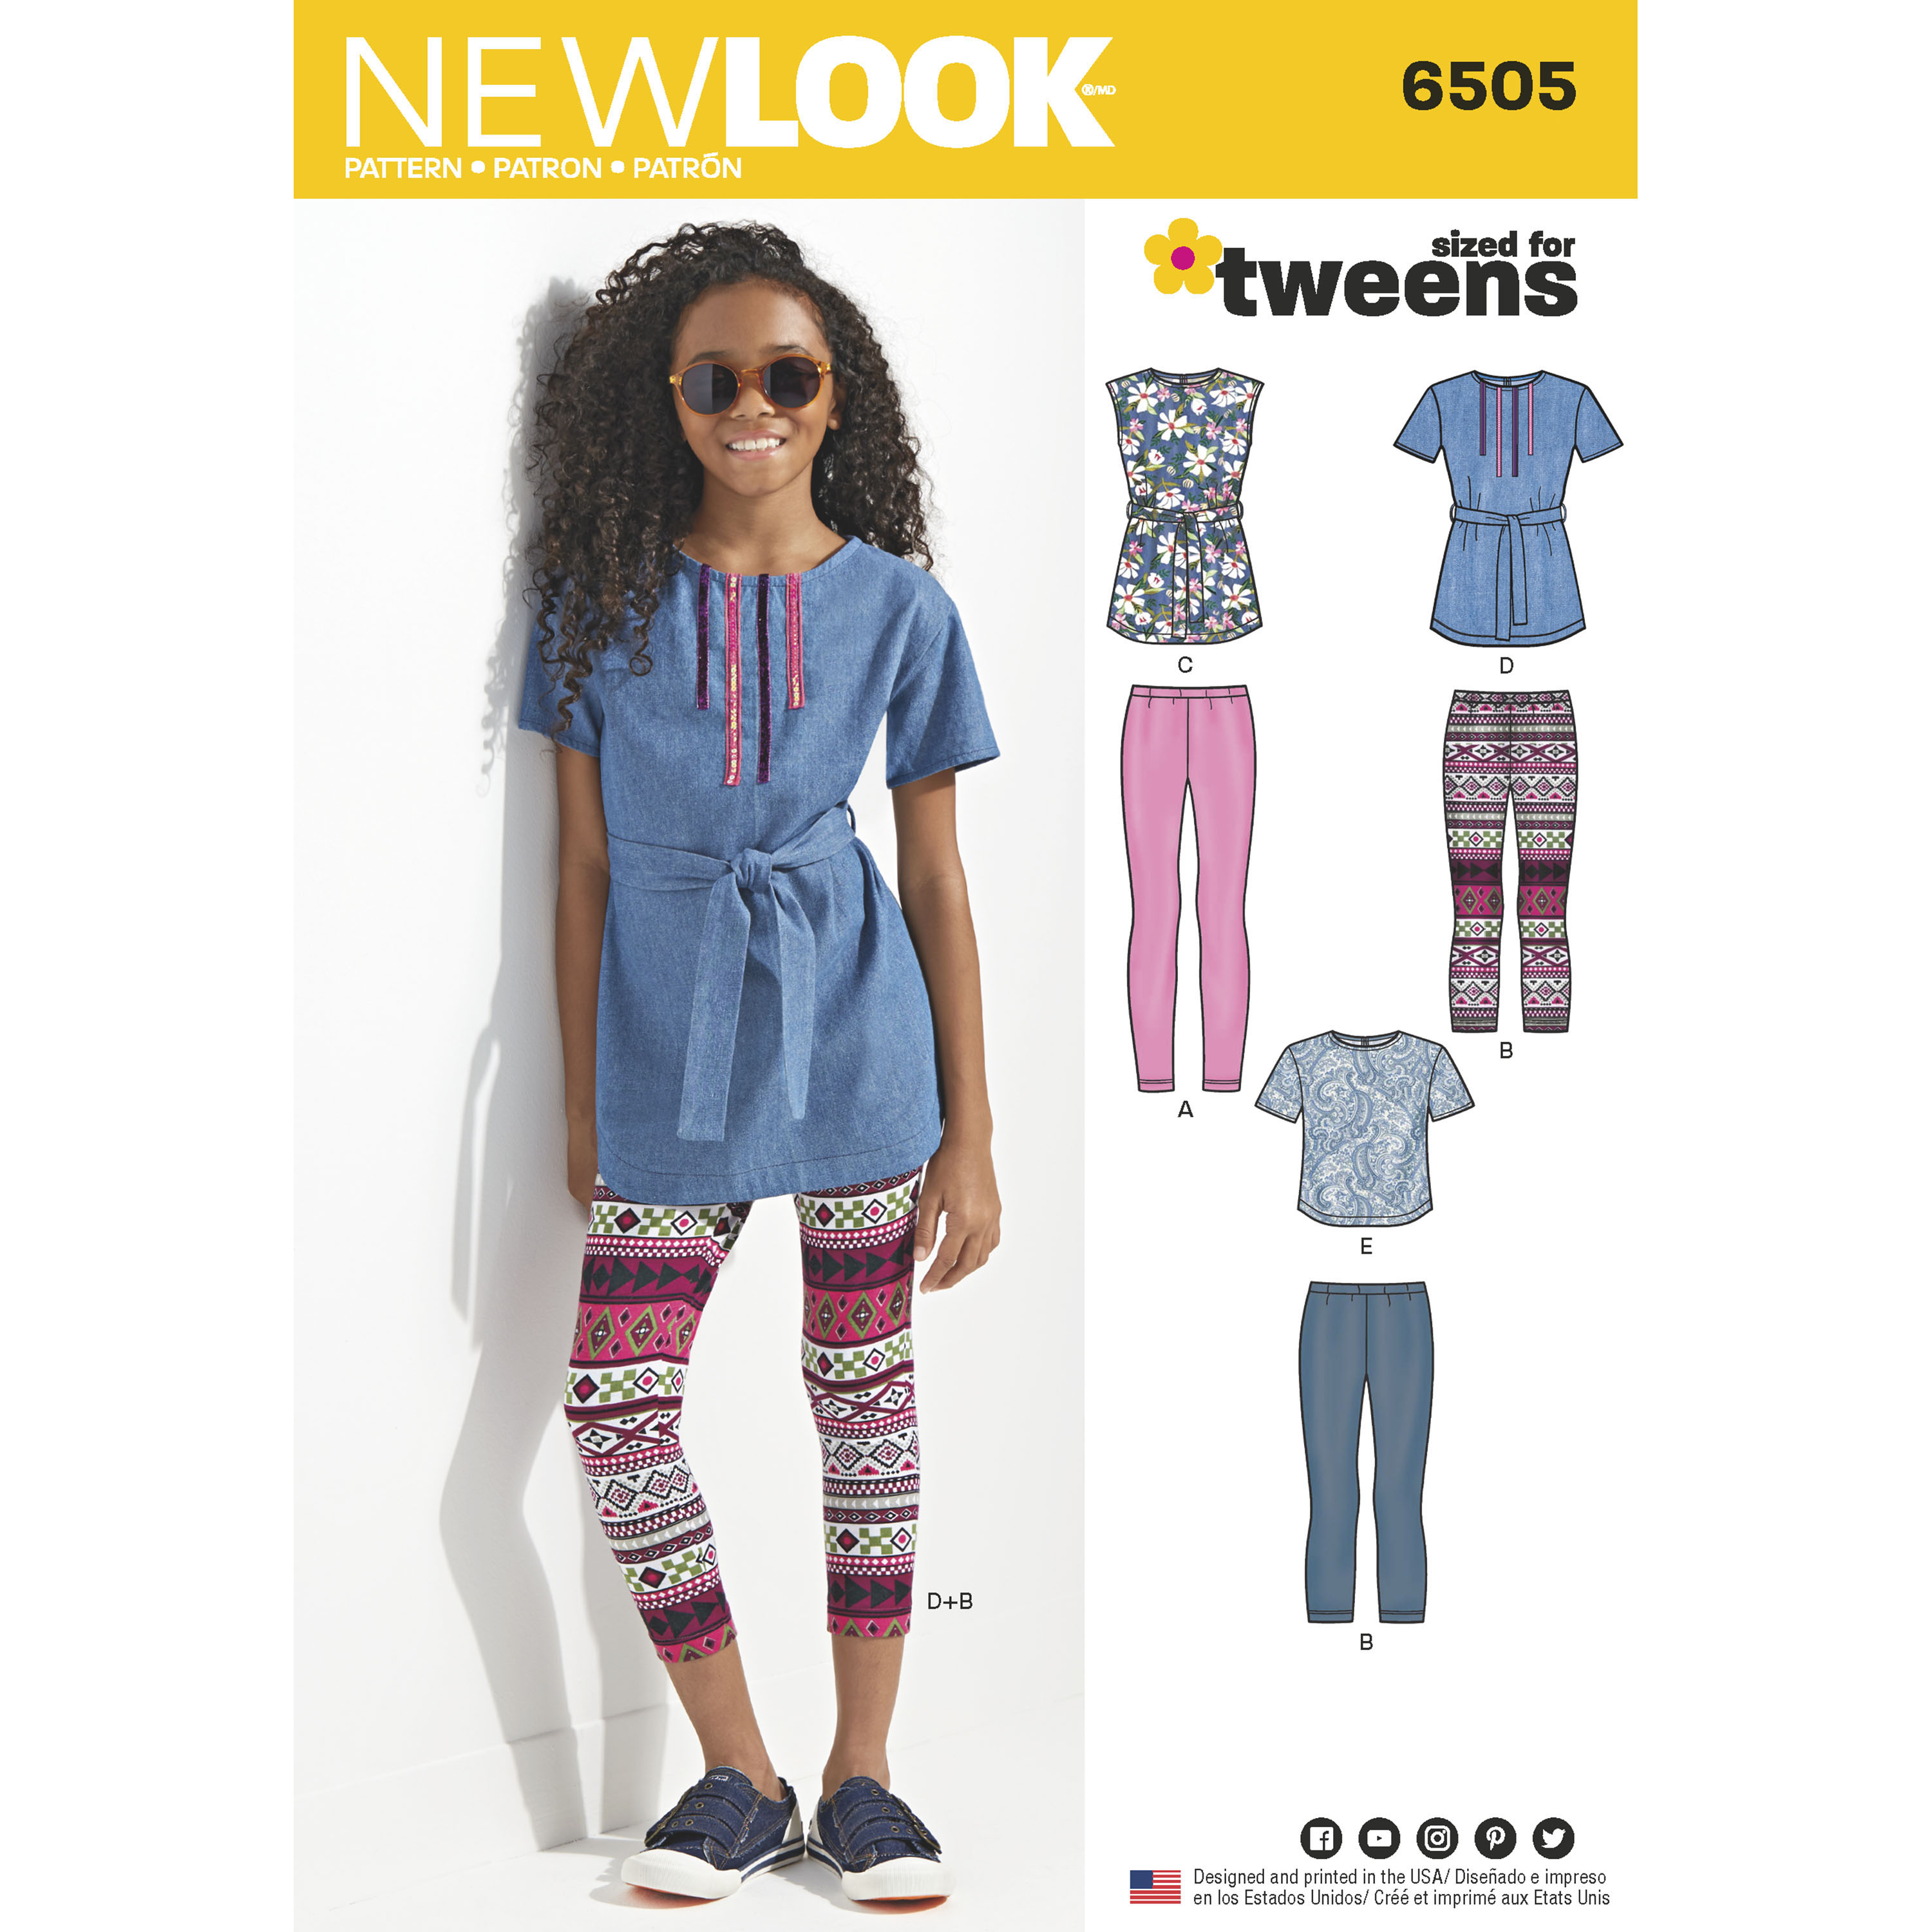 https://images.patternreview.com/sewing/patterns/newlook/2017/6505/6505.jpg